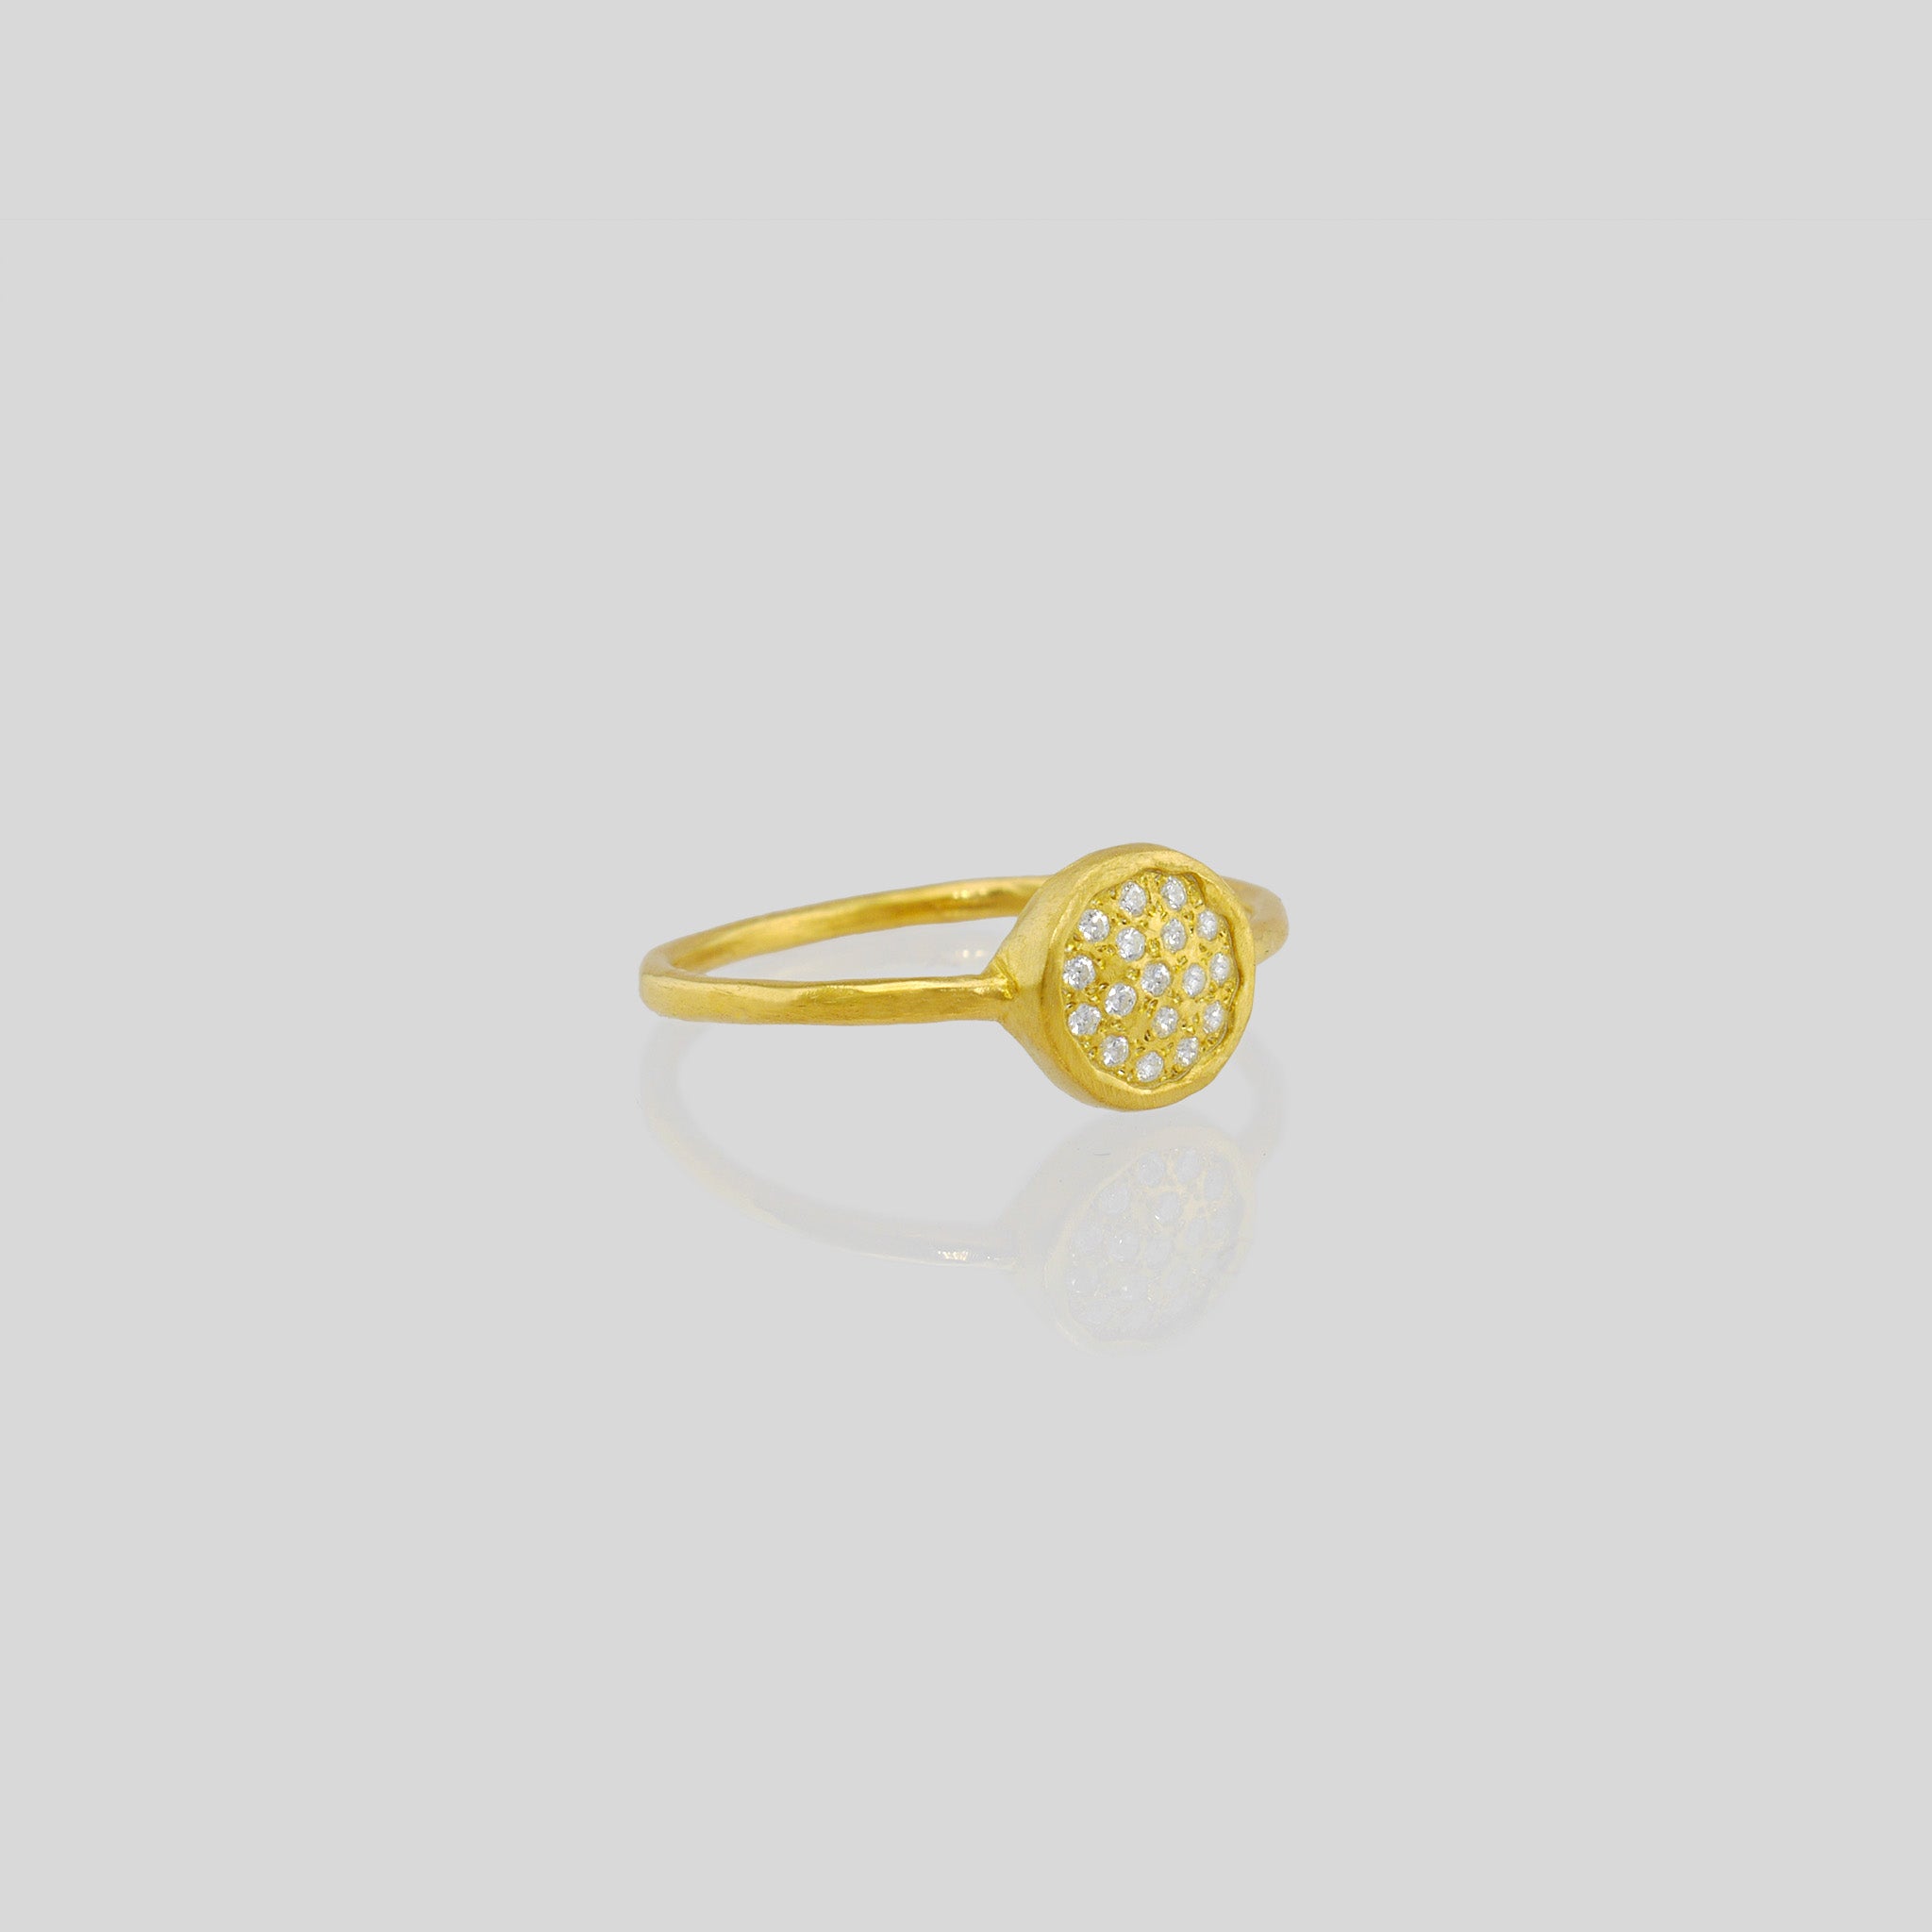 Delicate hand-made 18k Gold ring with a circular plate set with tiny Diamonds. The sparkle from the stones resembles a starry night.